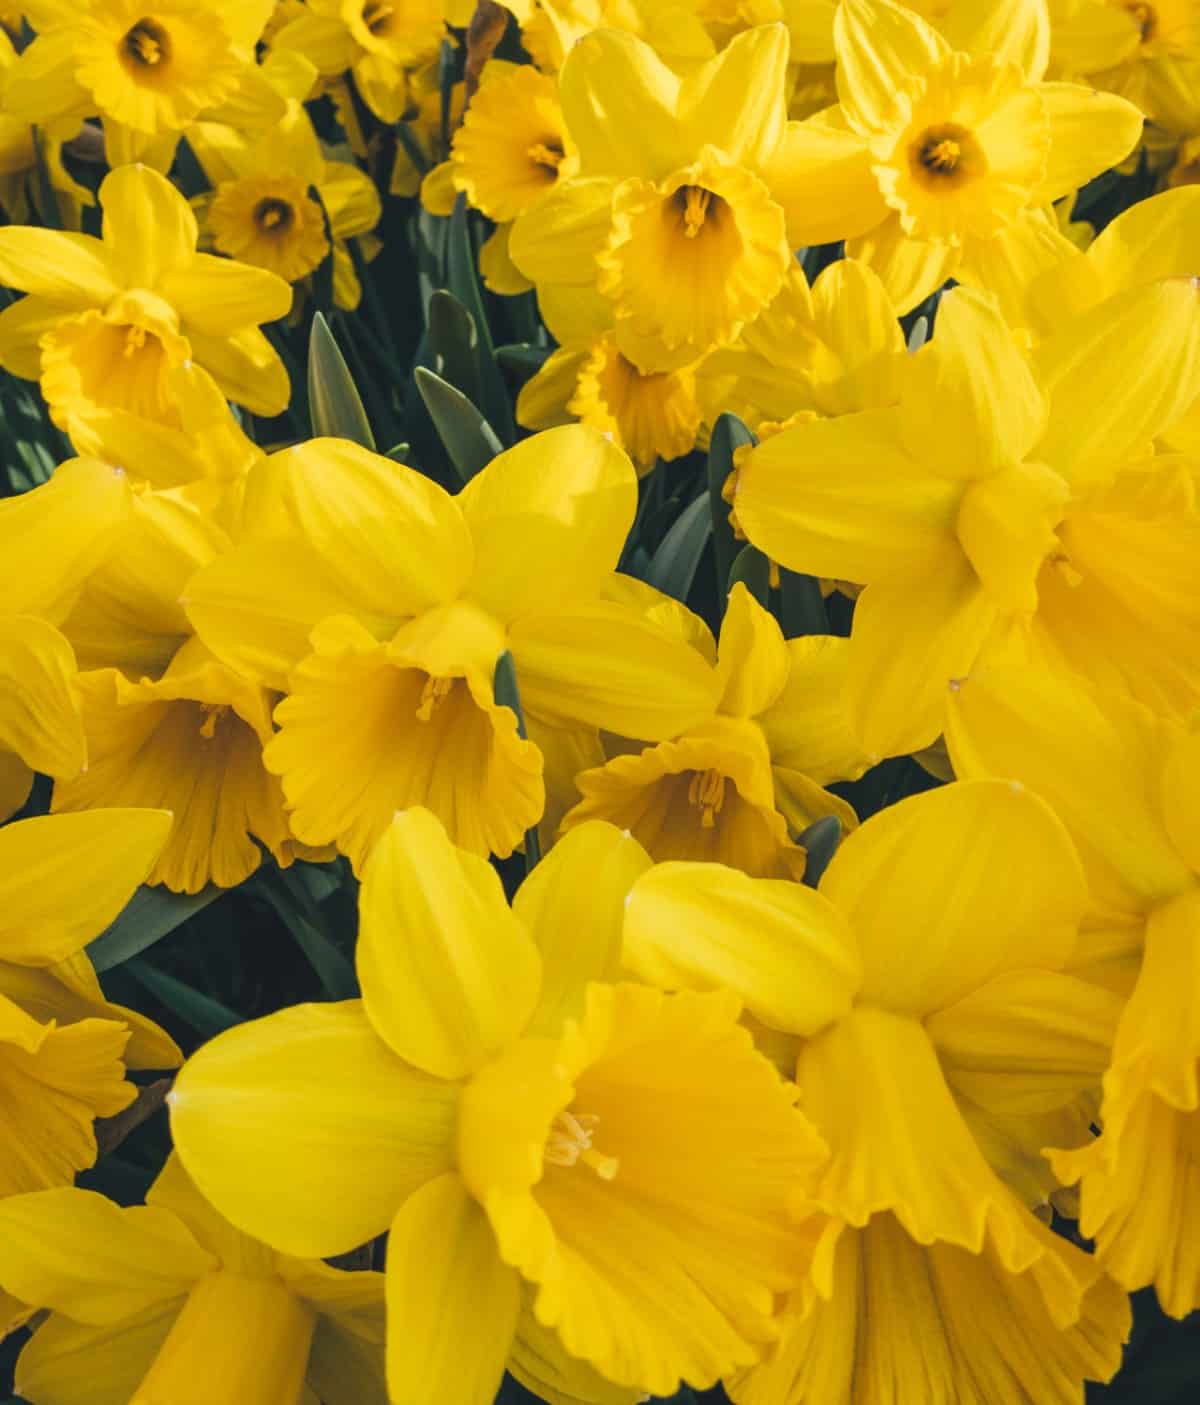 Daffodils are one of the first flowers to bloom in spring.